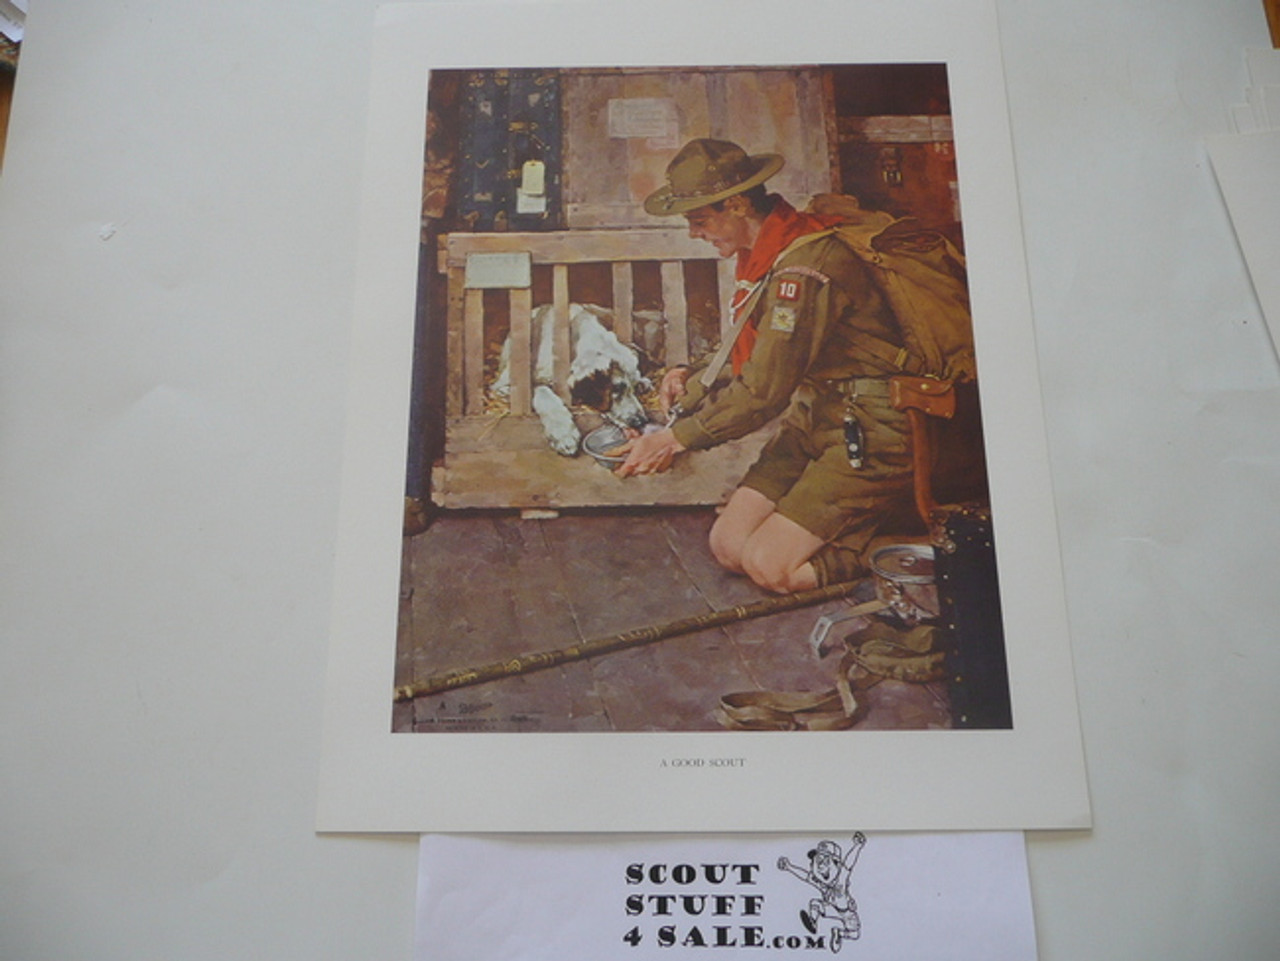 Norman Rockwell, A Good Scout (second Painting of same name), 11x14 On Heavy Cardstock, slight dogeared corners and/or watermark but print is unaffected and will frame or show fine